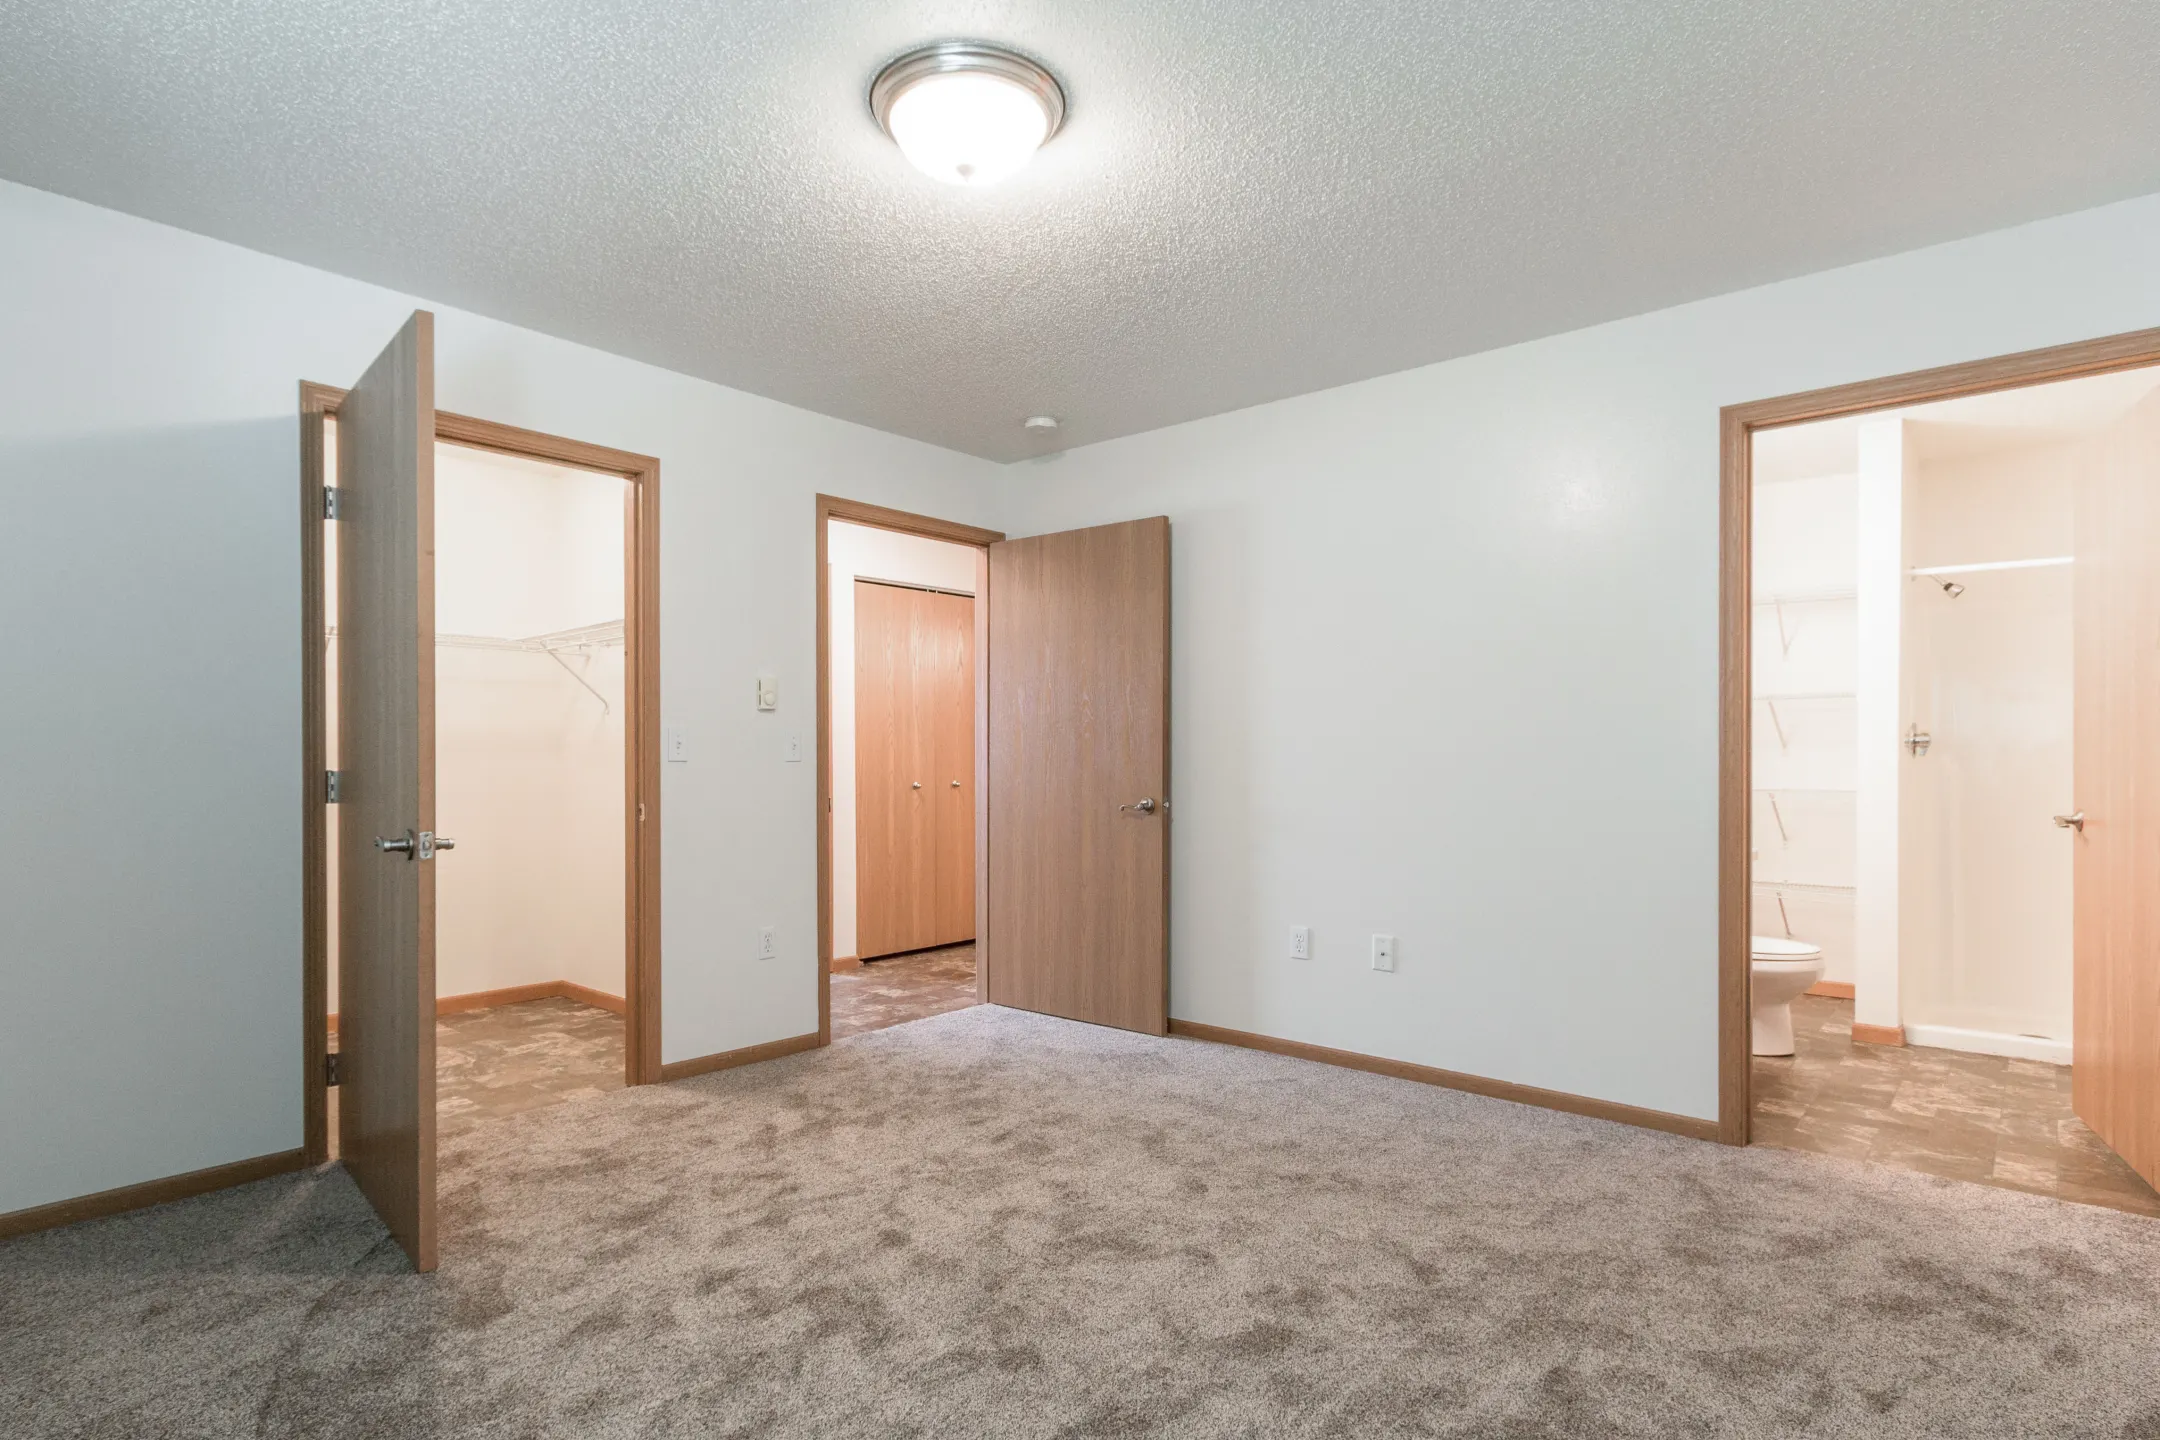 Bedroom - Central Park Apartments - Fargo, ND